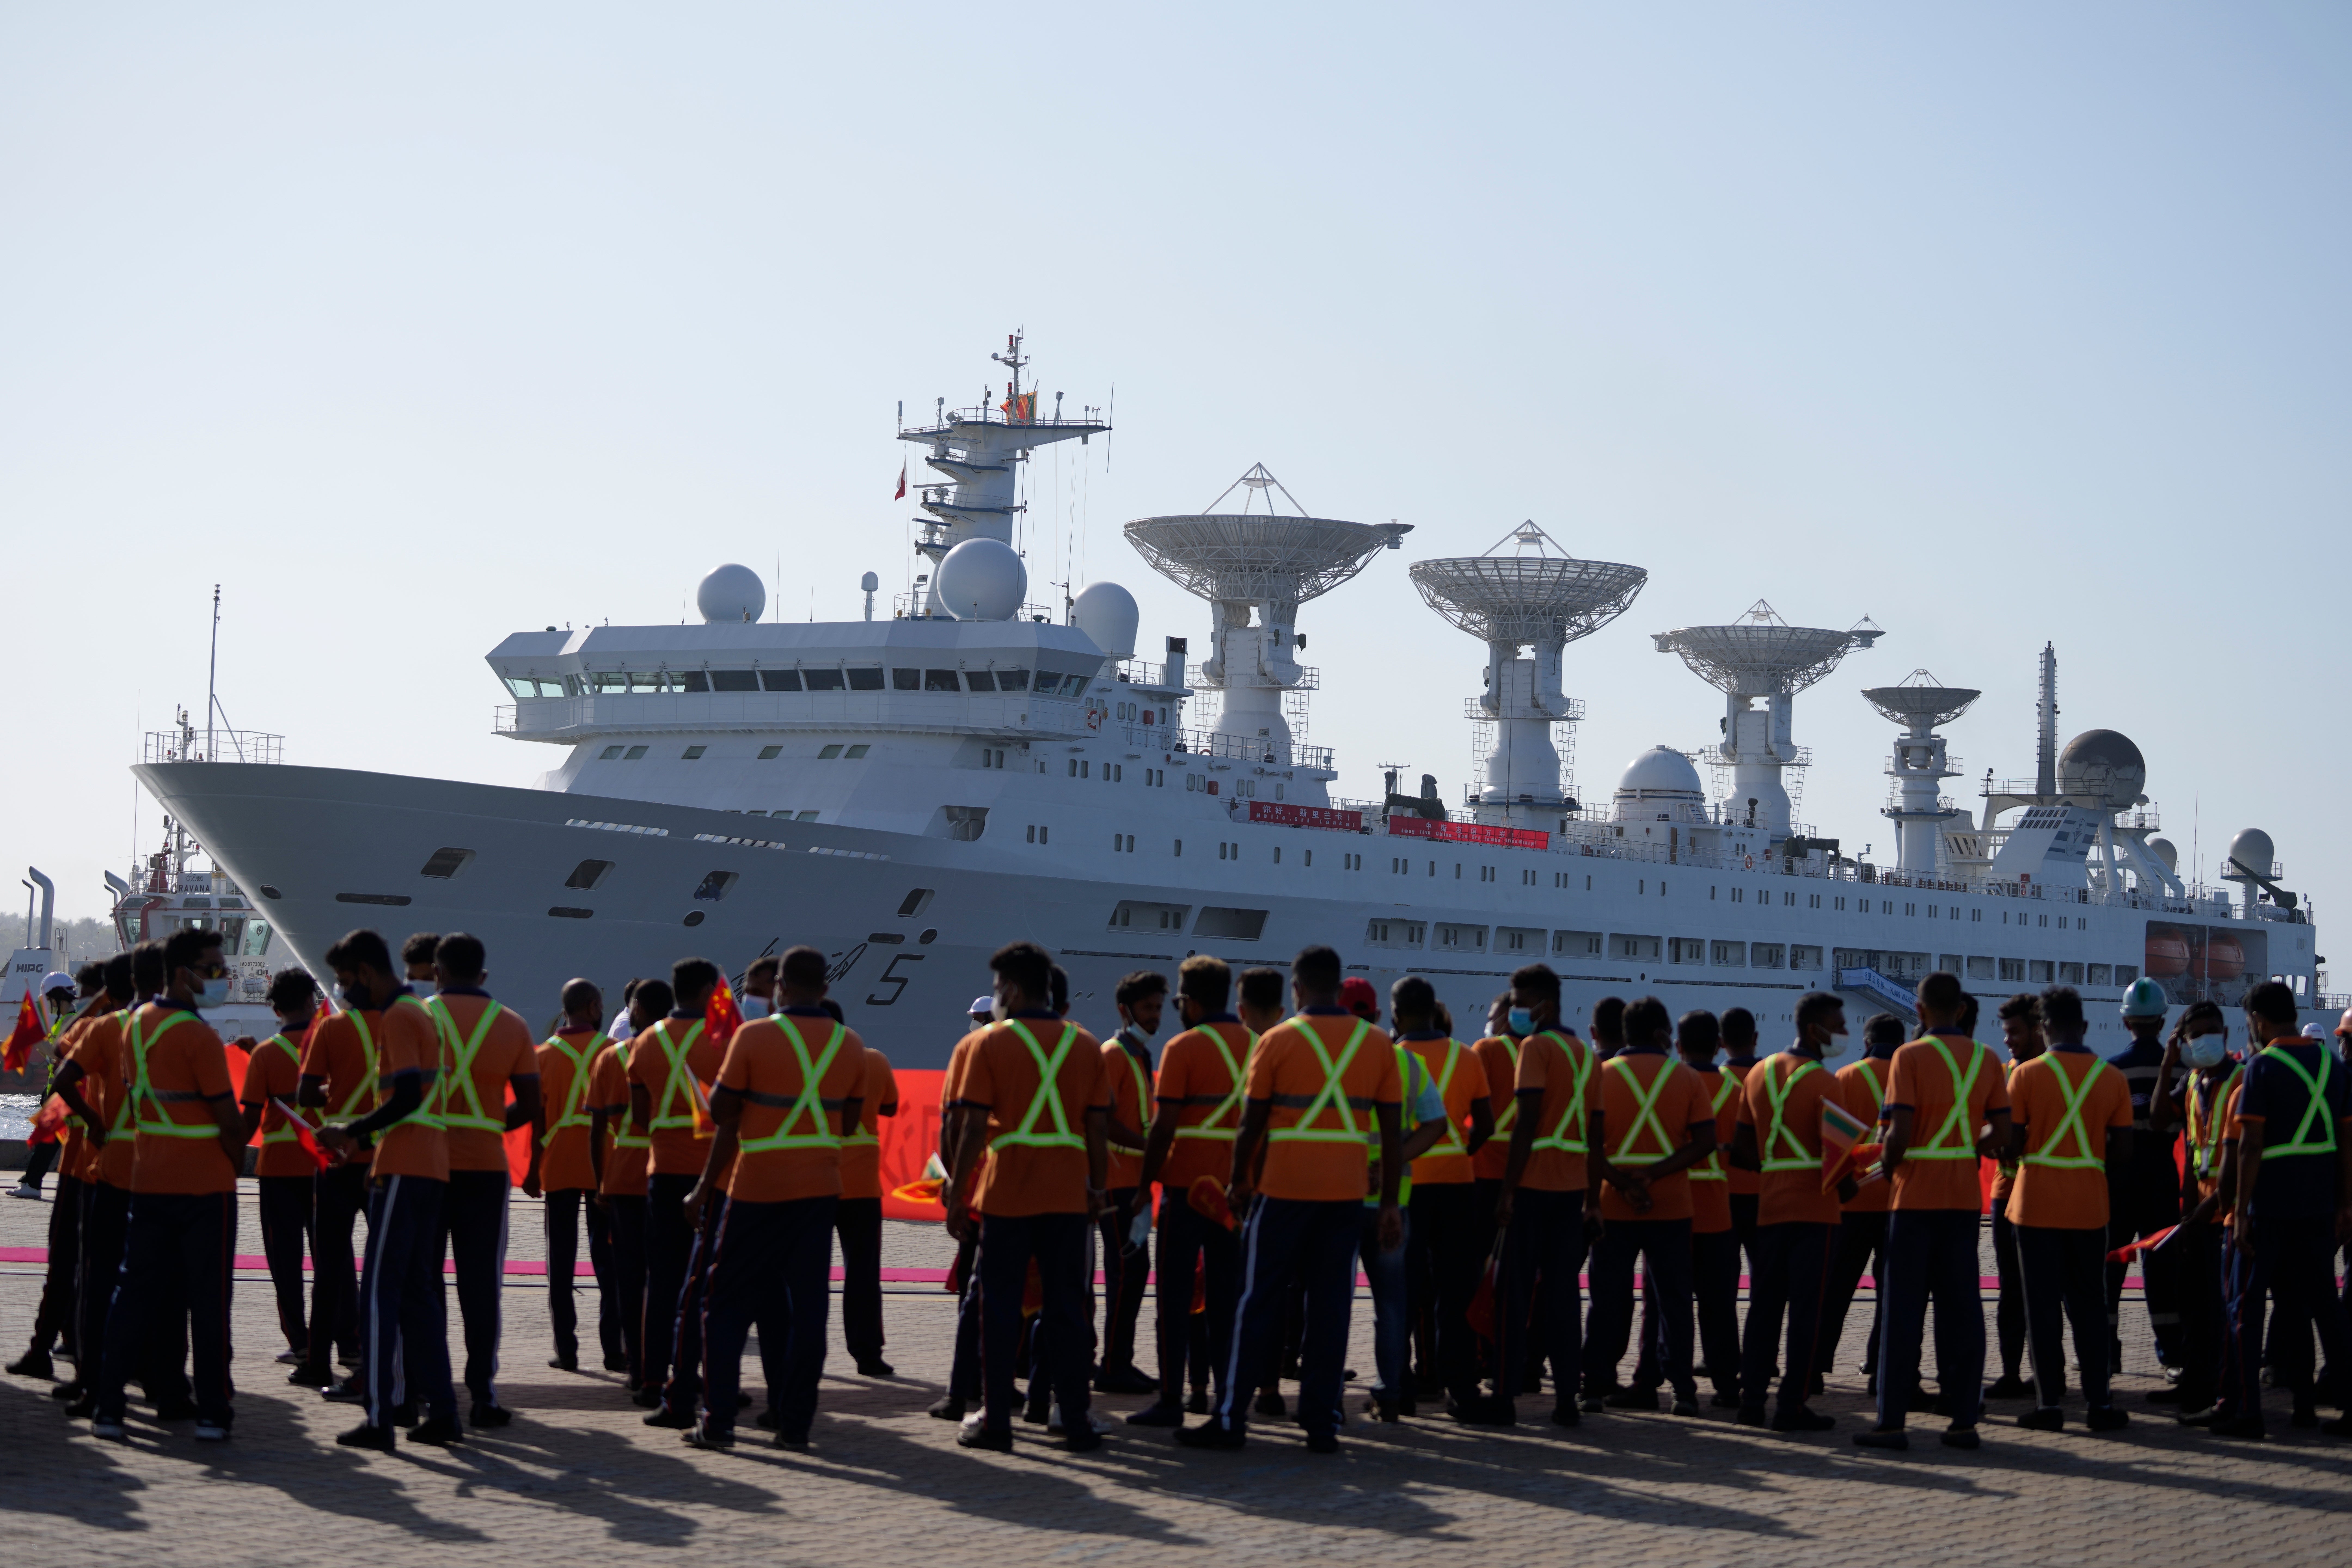 Yuan Wang 5, a Chinese scientific research ship, arrives at the port in Hambantota, Sri Lanka, Tuesday on 16 August 2022 after an earlier port call was deferred due to apparent security concerns